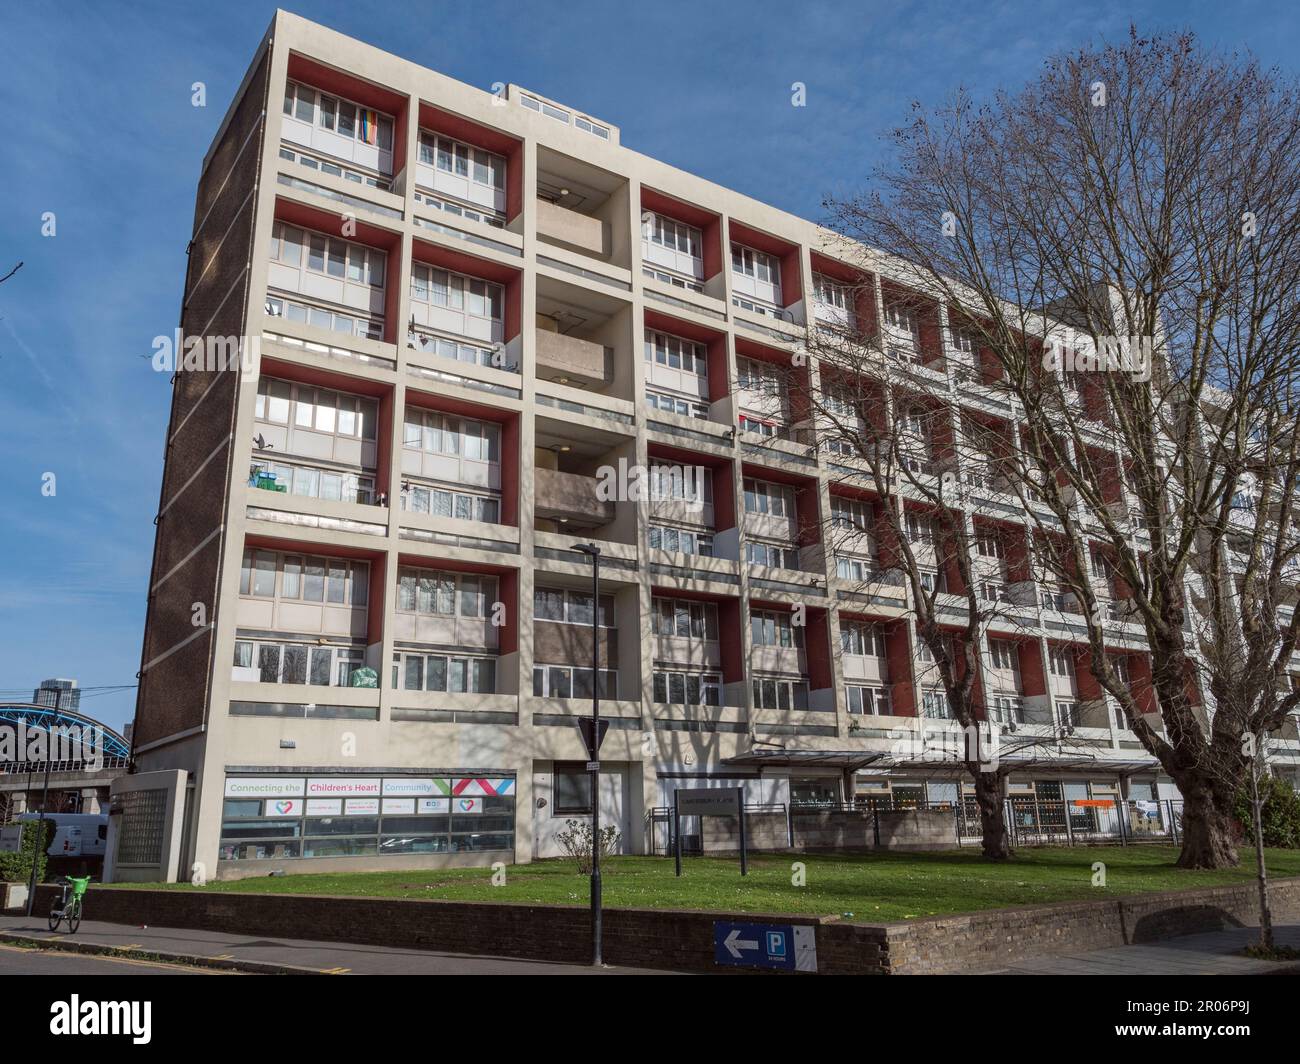 Canterbury House (1957), designed by Leslie G Creed, a concrete framed tower block of flats in central London, UK. Stock Photo